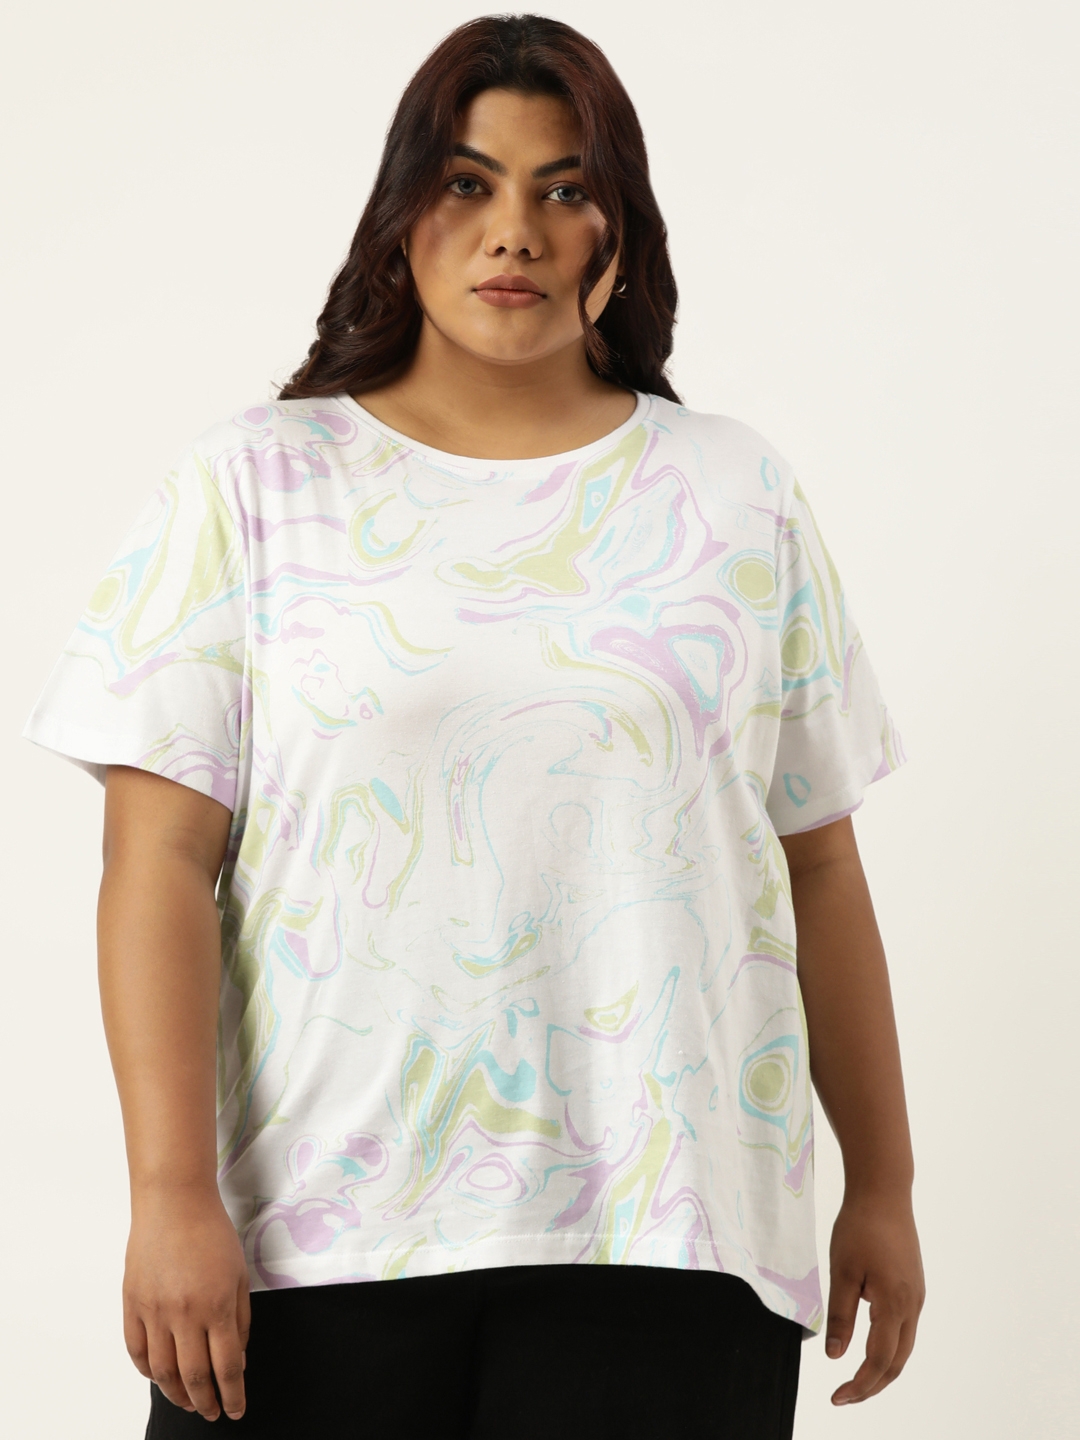 Plus Size White All Over Printed Round Neck Bio Wash tshirt For women